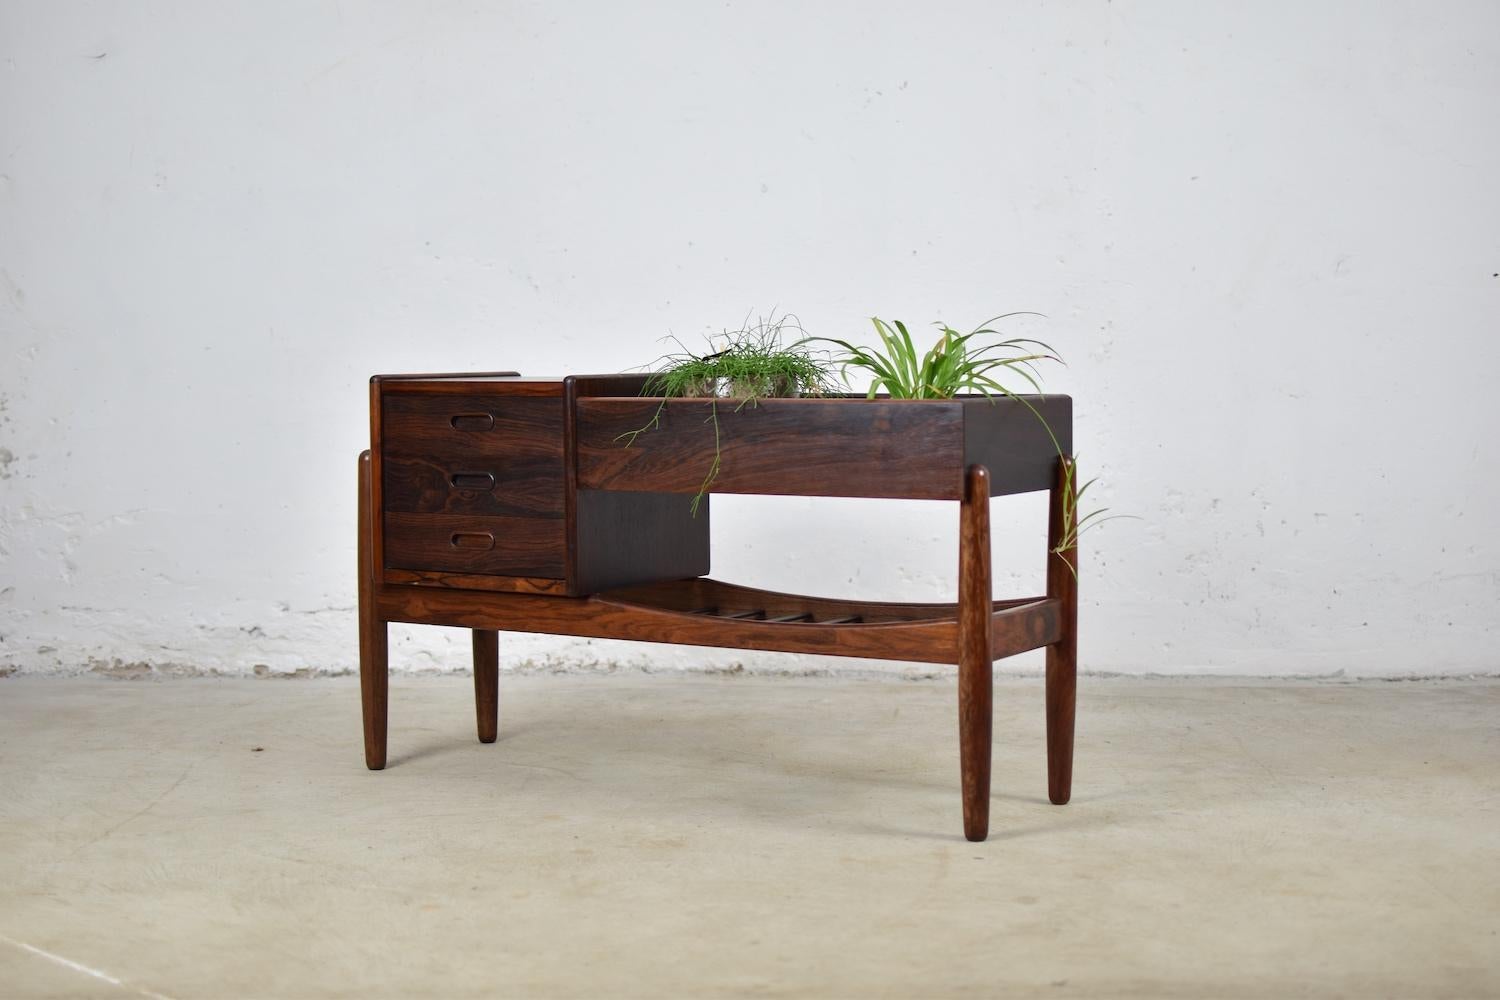 This entry chest was designed by Arne Wahl Iversen for Vamo Møbelfabrik, Denmark 1961. It features a chest of three drawers on the left and a low slated magazine shelf under the planter area, all in rosewood. Finished back, allowing it to be placed